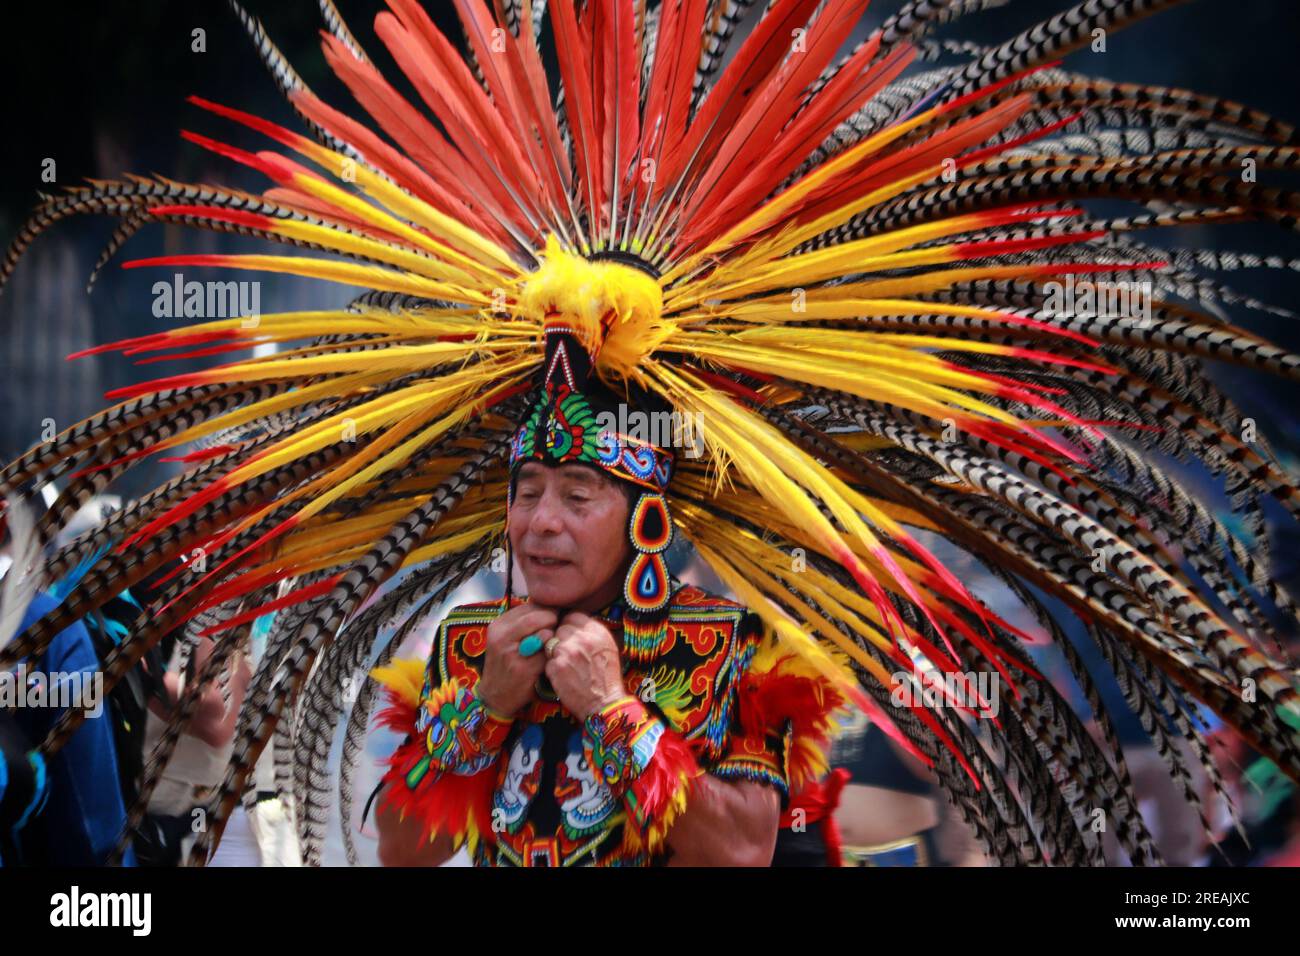 Mexico City Mexico 26th July 2023 July 26 2023 In Mexico City Mexico Members Of Indigenous Neighborhoods Take Part During The Ceremony Of The 698th Anniversary Of The Founding Of Mexico Tenochtitlan And Second Zenithal Passage In The Zcalo Of Mexico City On July 26 2023 In Mexico City Mexico Photo By Carlos Santiago Credit Eyepix Groupalamy Live News 2REAJXC 